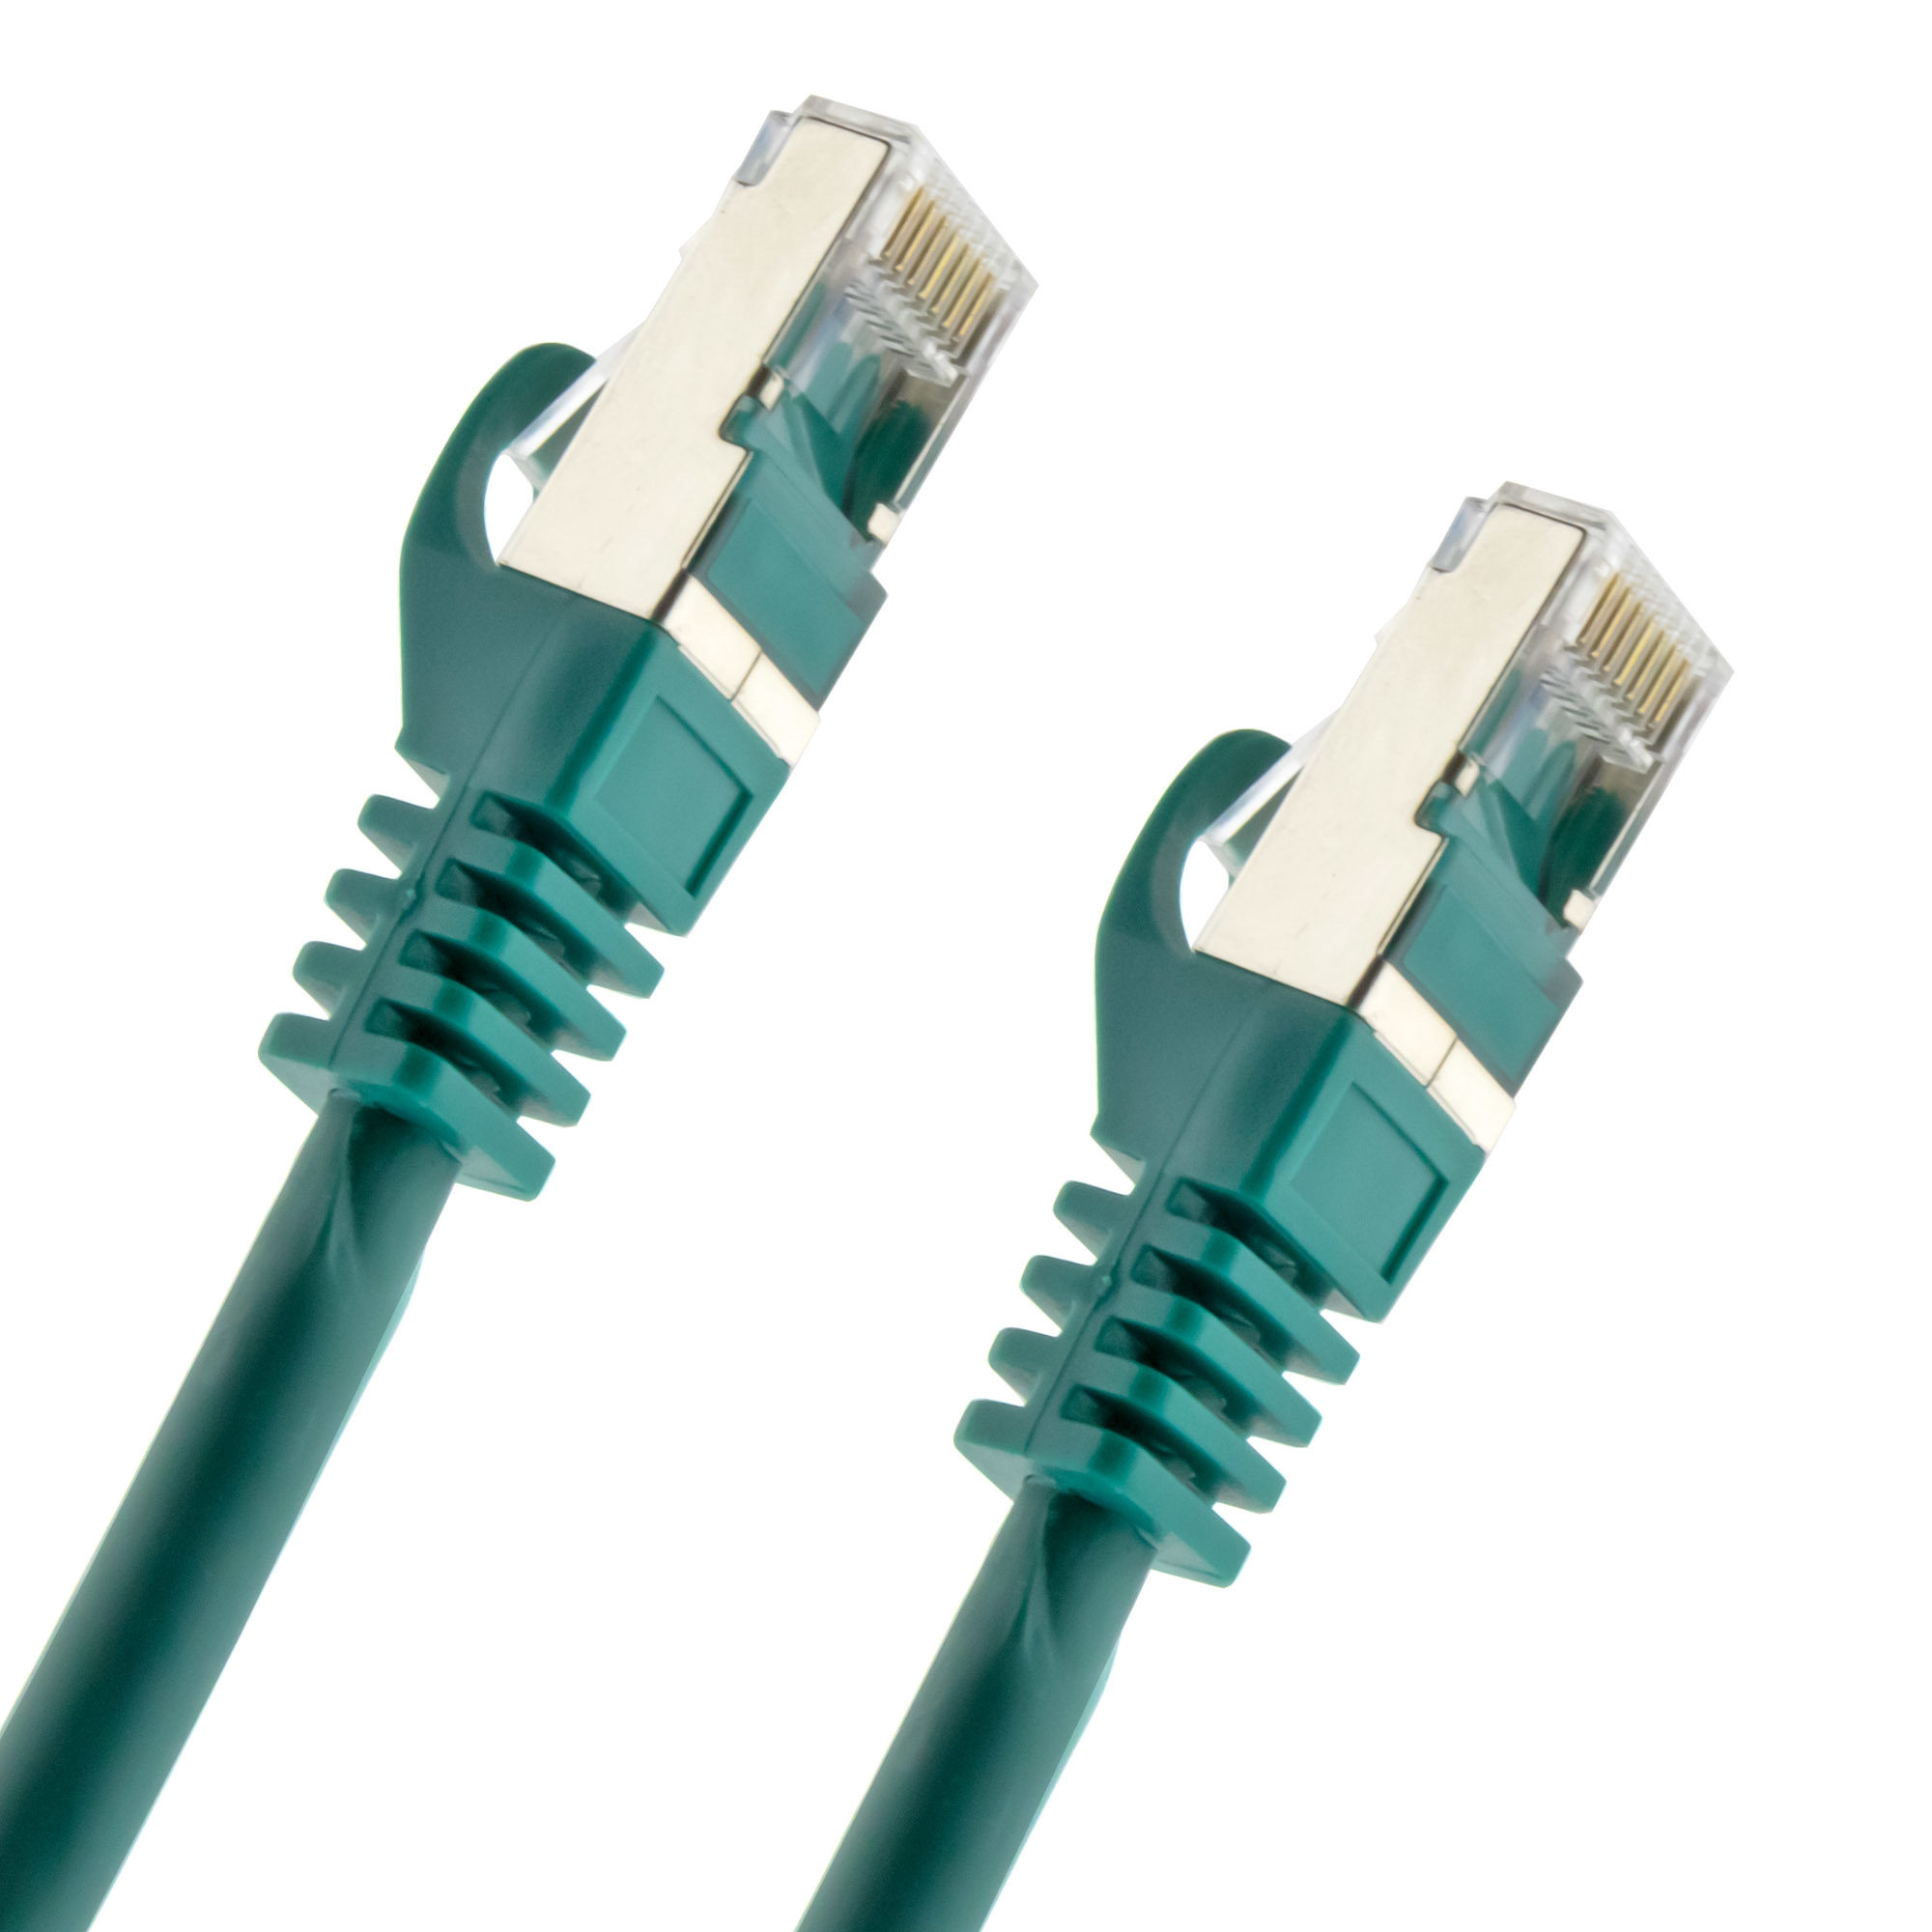 Network cable Cat. 7 S/FTP PIMF 15 meter green